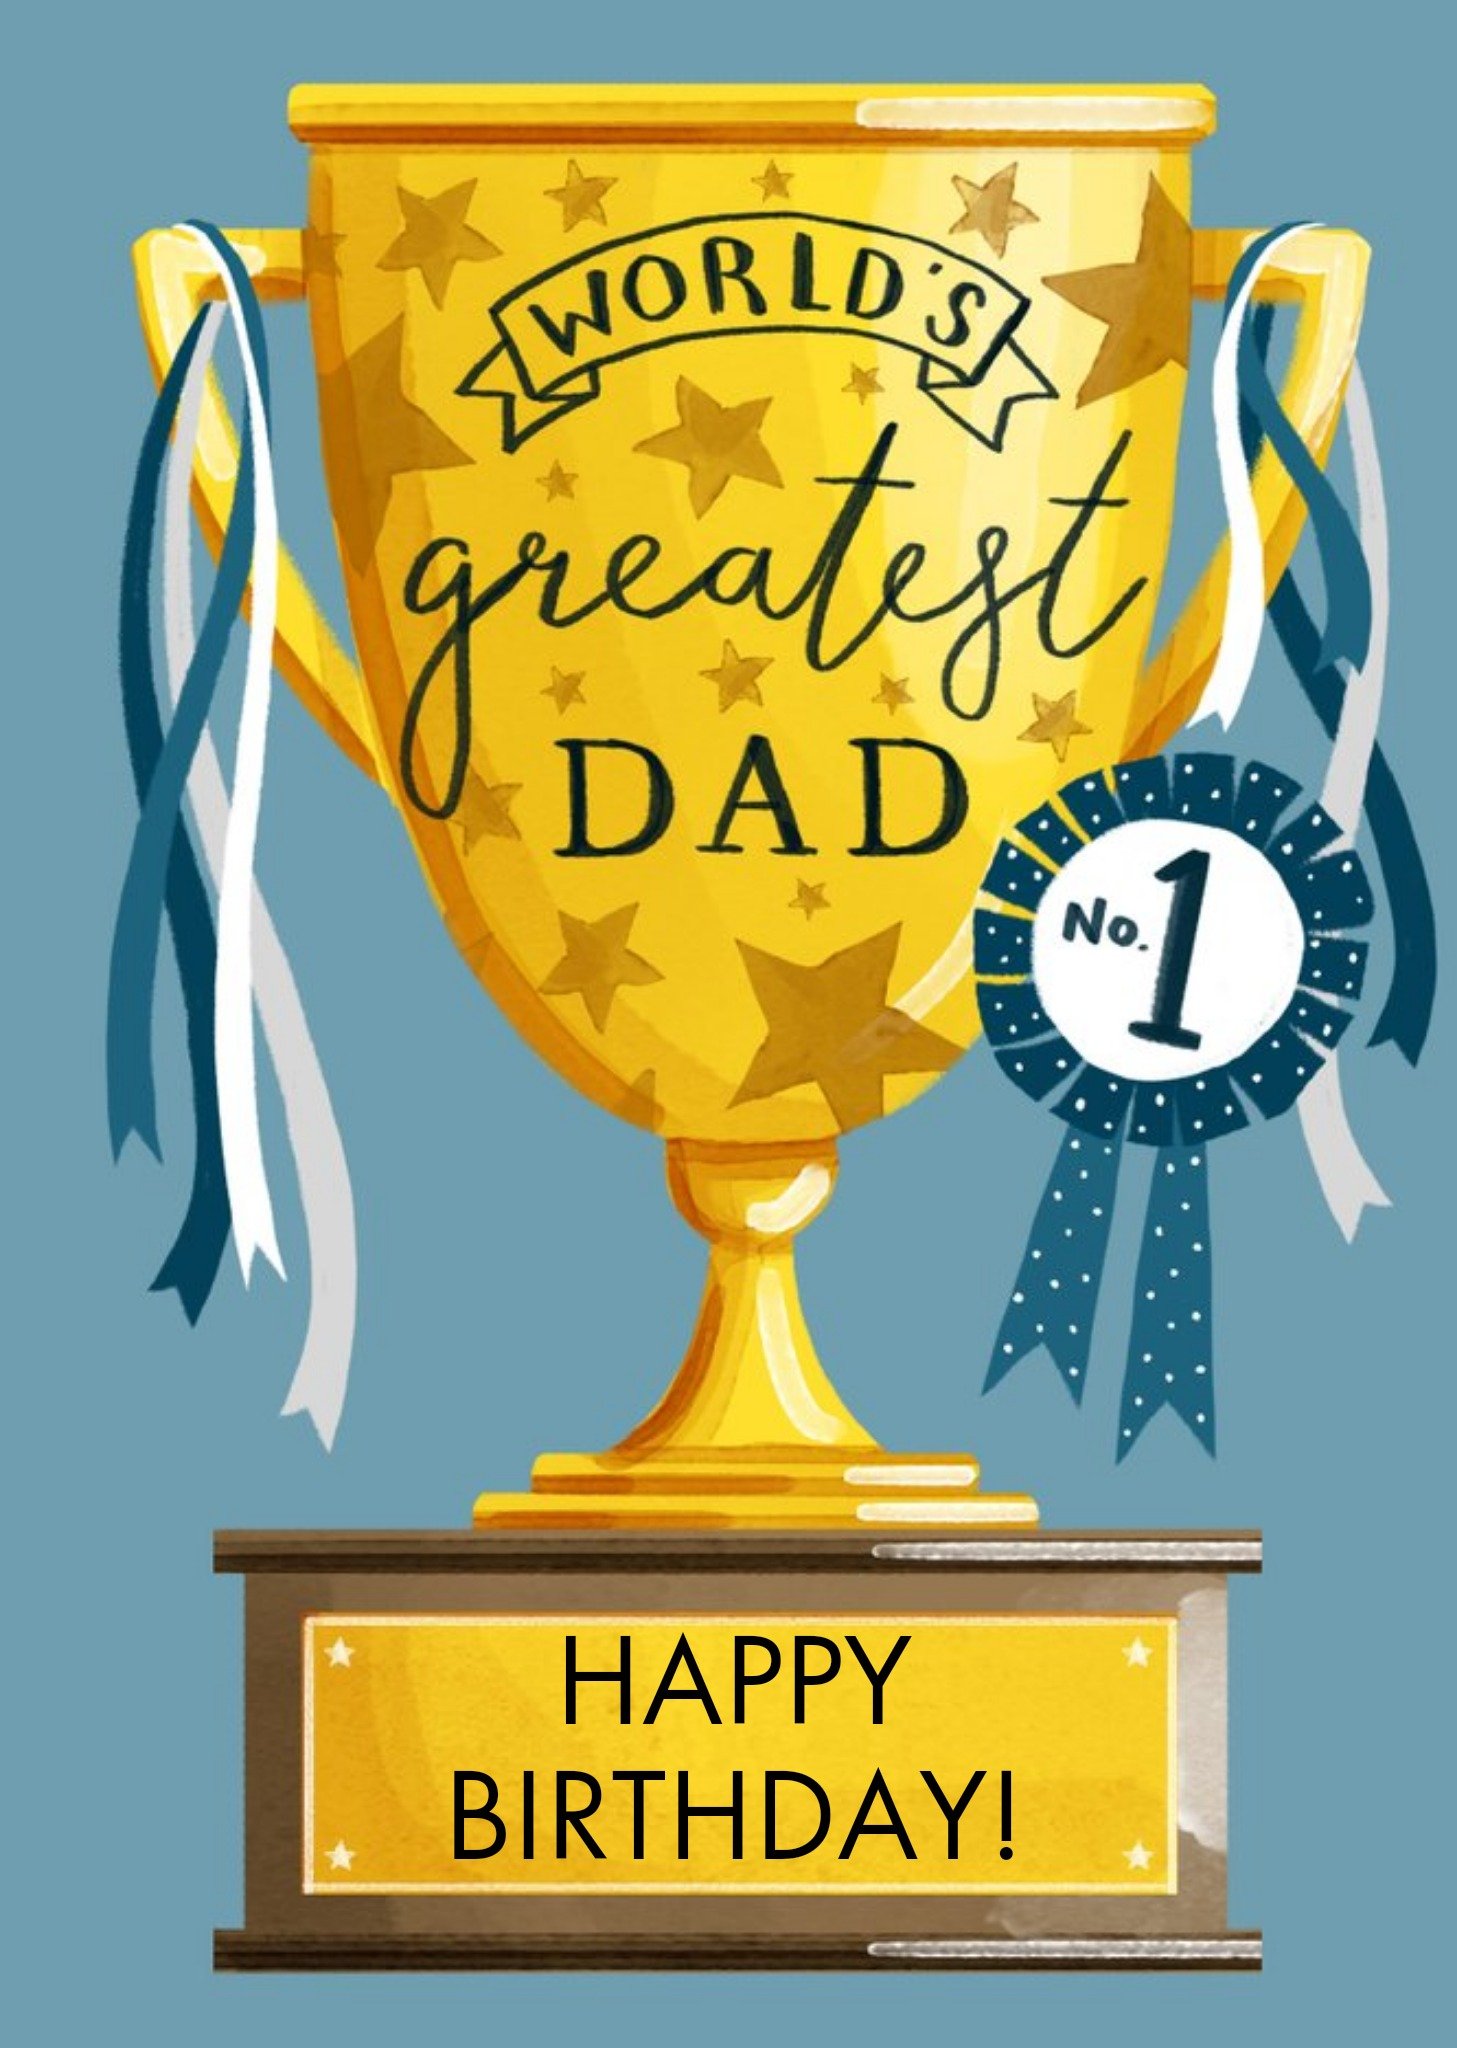 Making Meadows Worlds Greatest Dad Trophy Illustration No.1 Birthday Card, Large